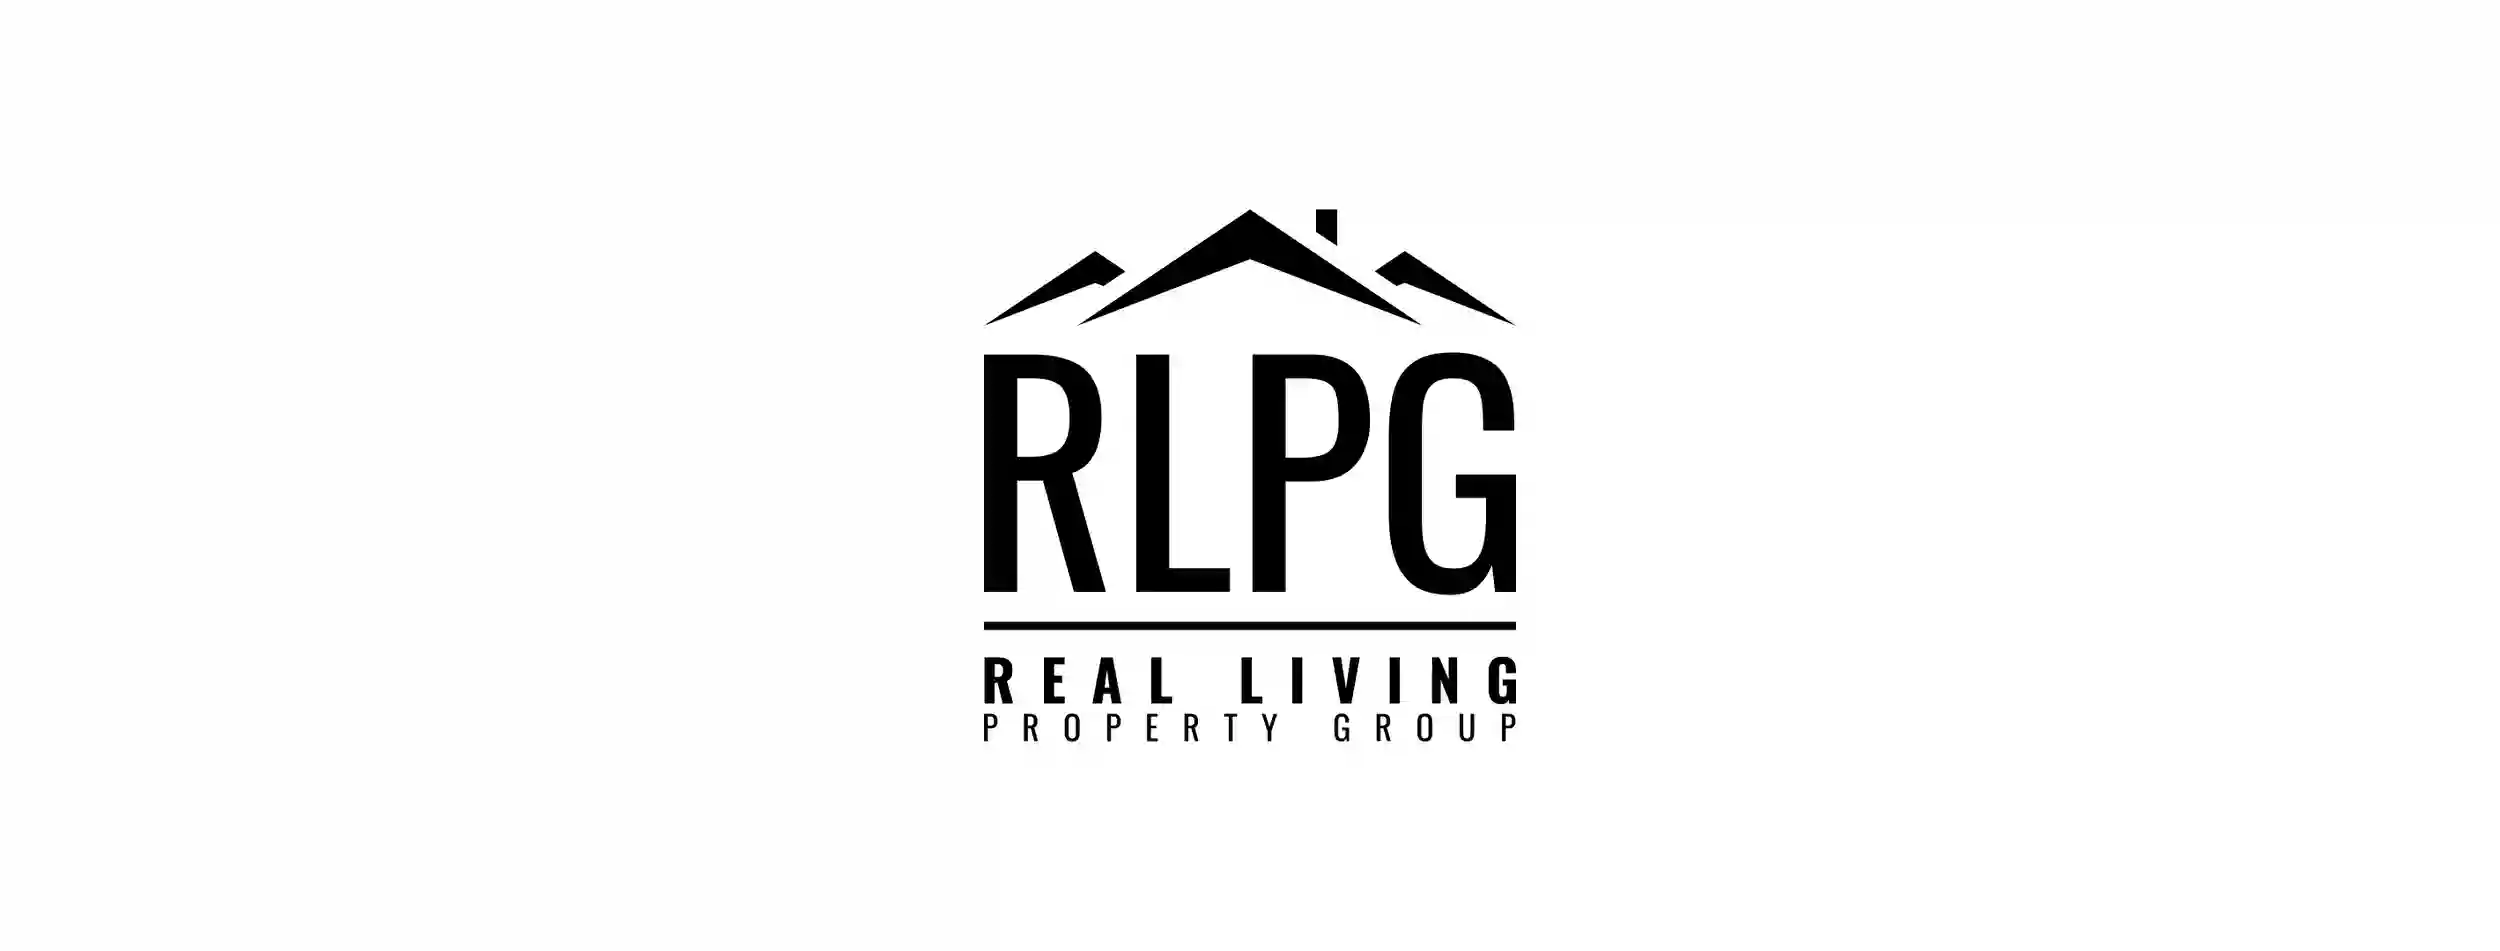 Real Living Property Group